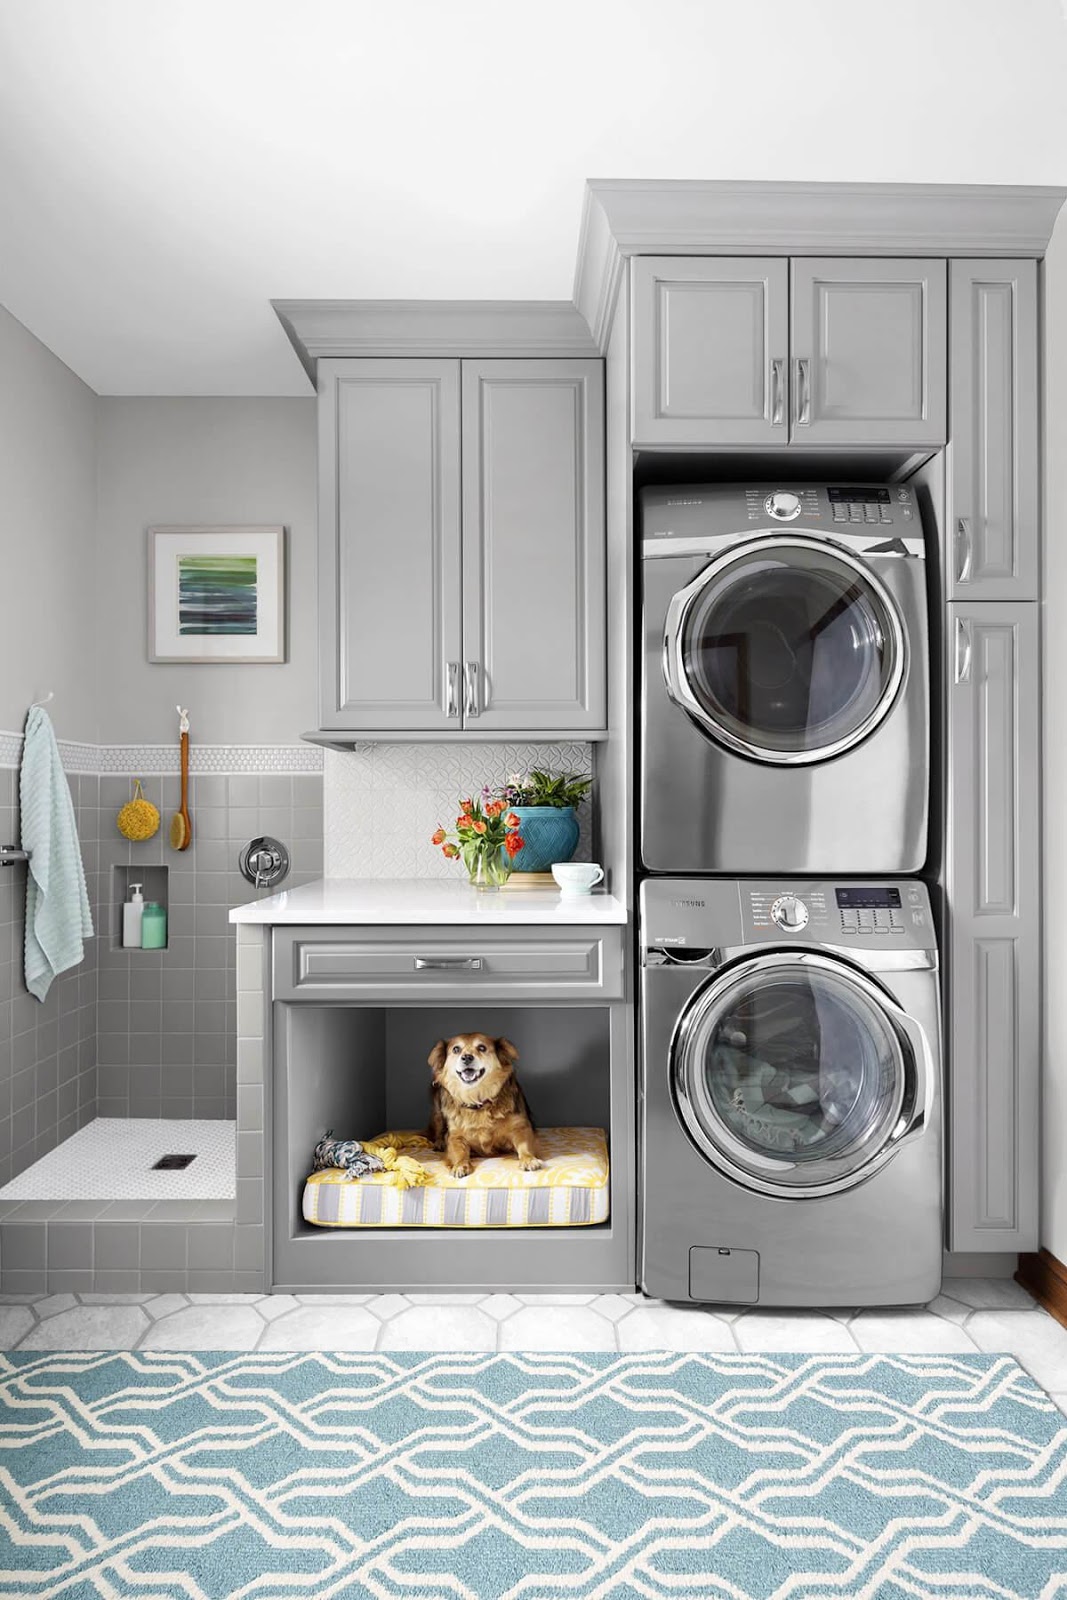 10. Clothes and Pet Cleaning Laundry Room by simphome.com